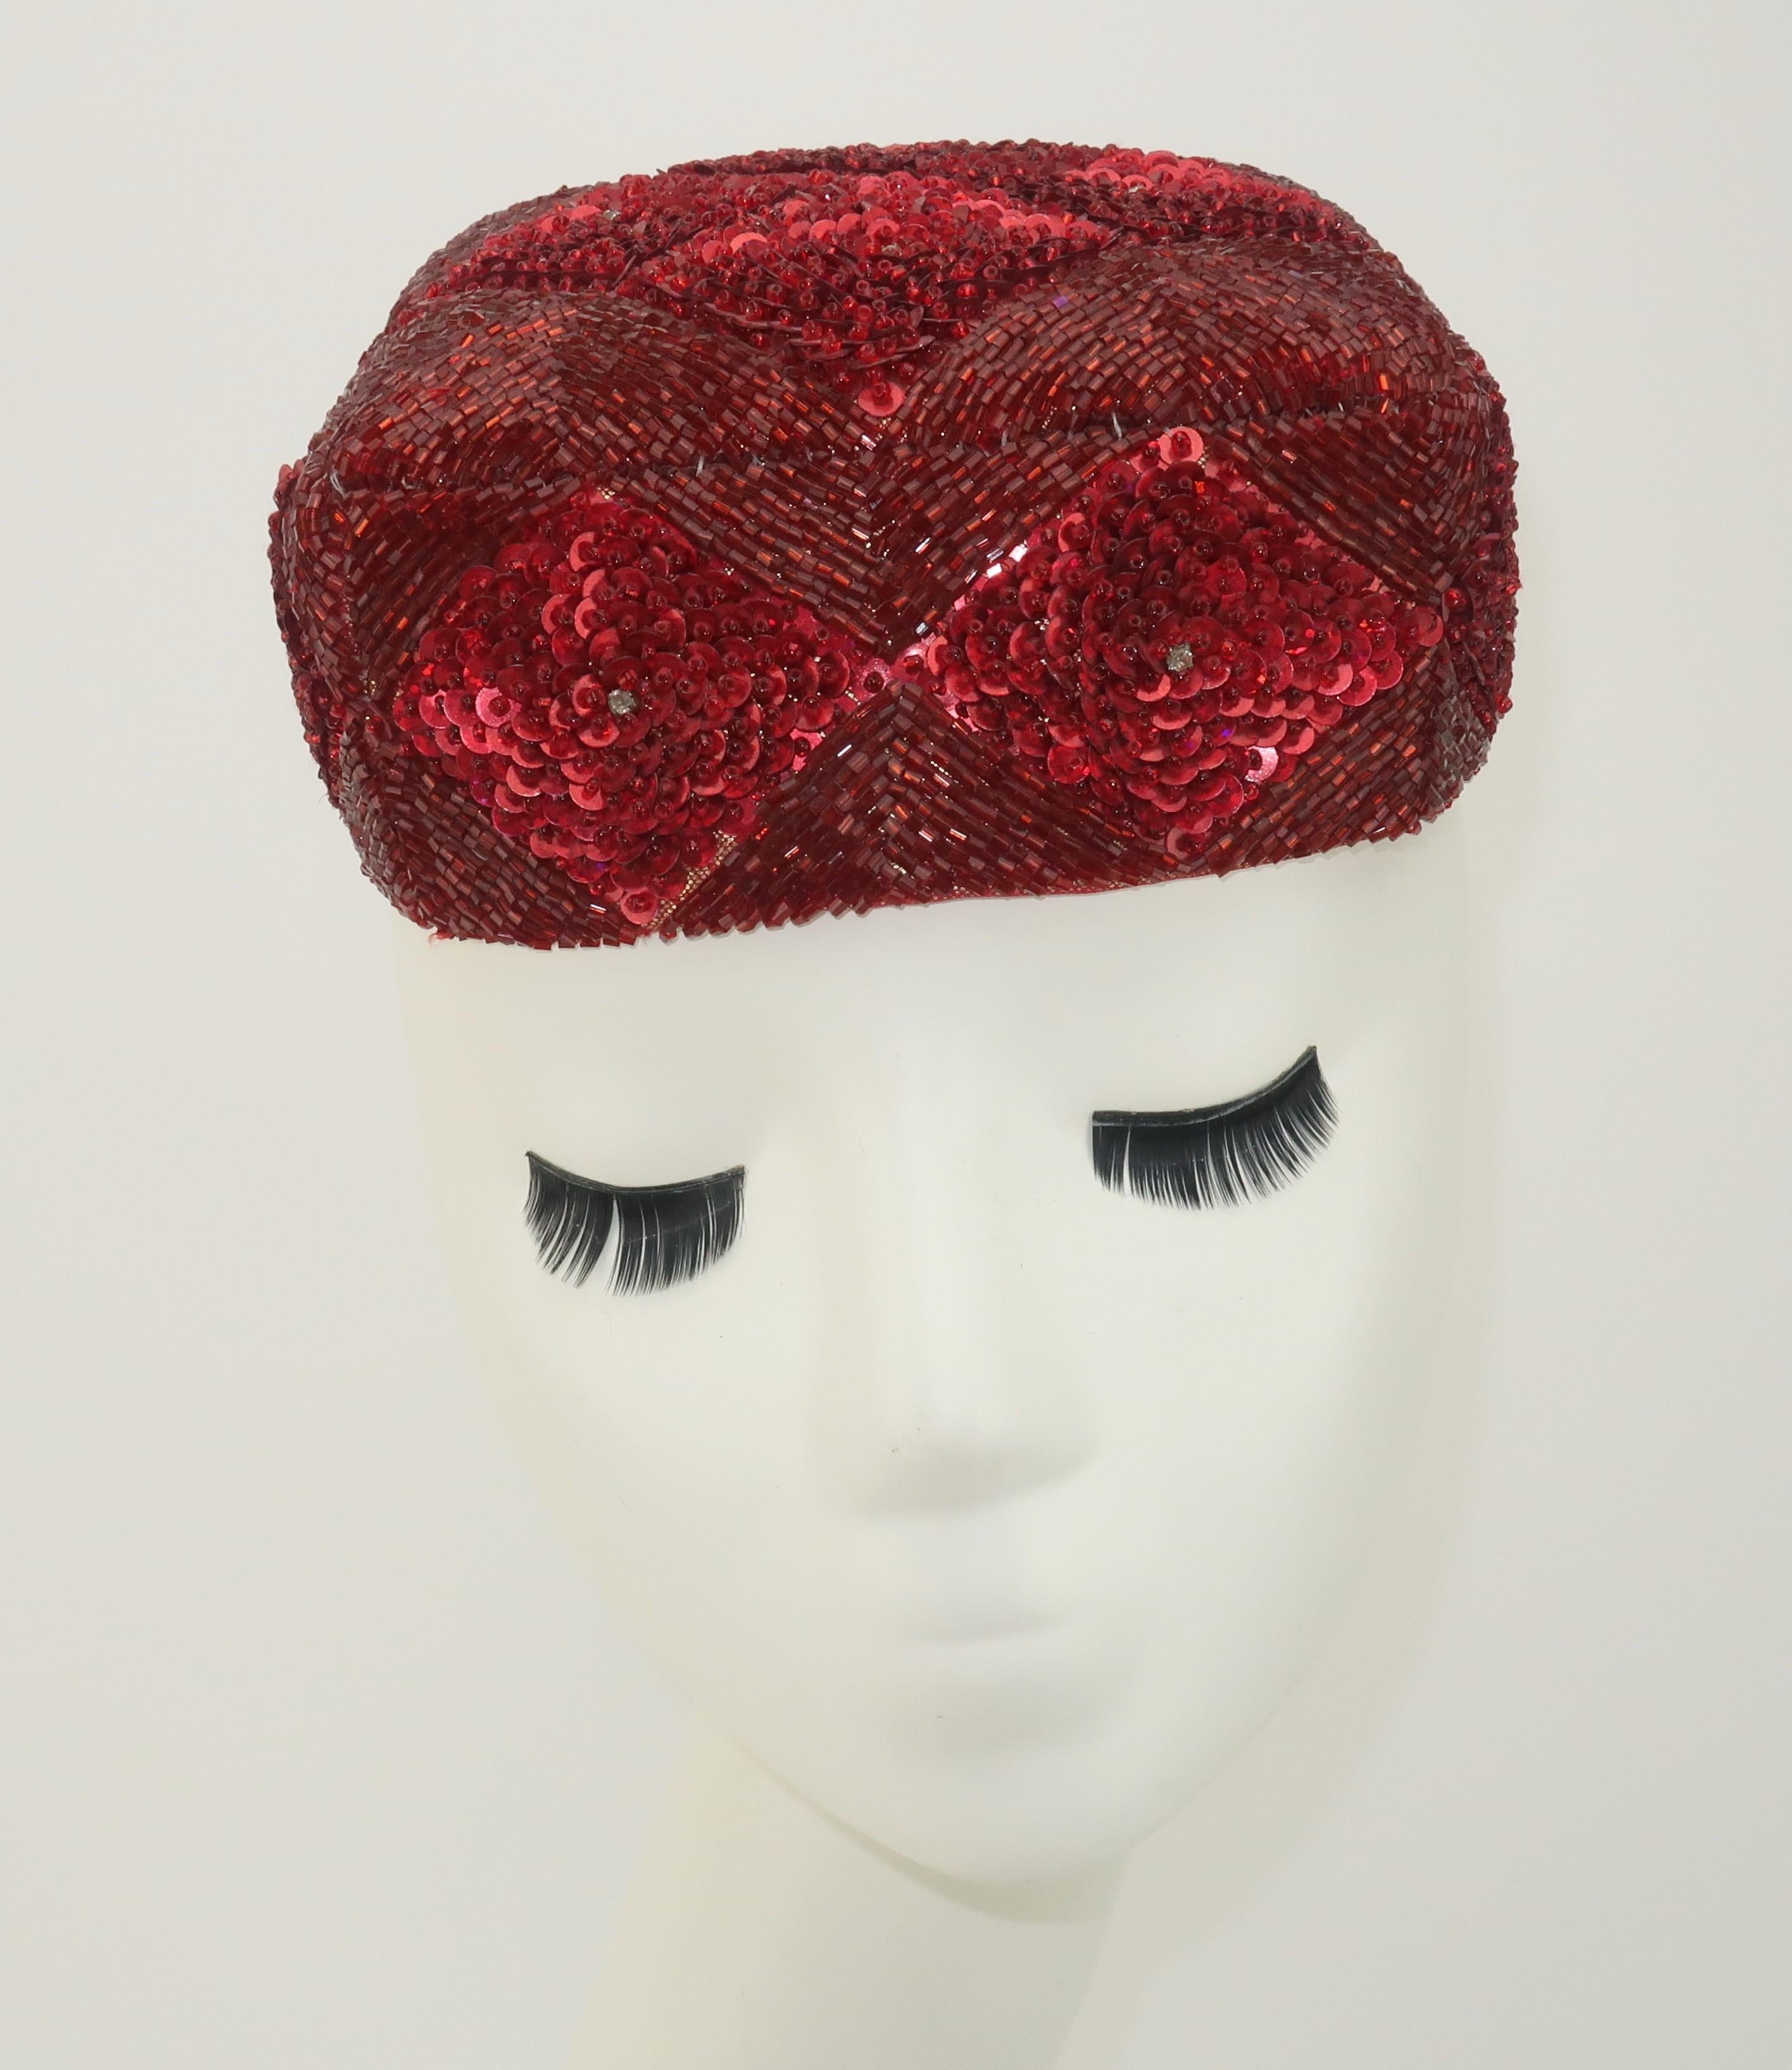 Early 20th Century Central Asian hat, possibly Uzbekistan or Turkmenistan, with an intricate geometric pattern of ruby red sequins and beads accented by crystals on silk.  The interior is lined with a quilted floral printed cotton.  From the estate